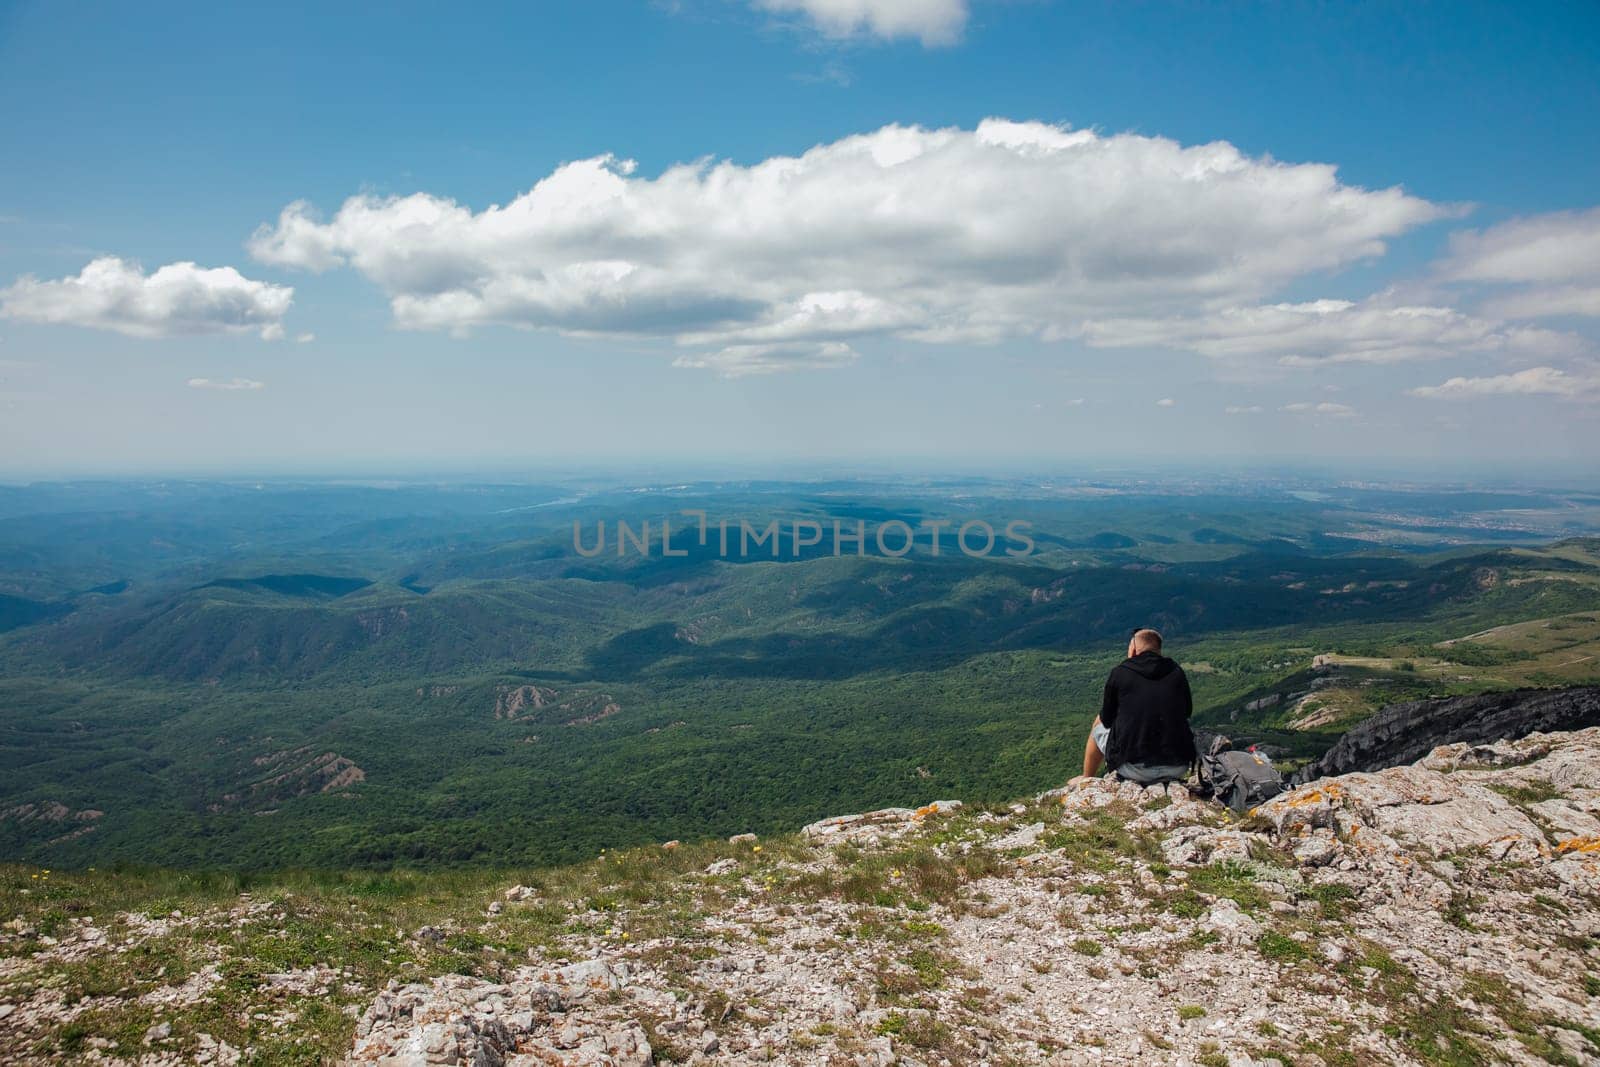 a man sitting on a mountain view from above a journey hike by Simakov